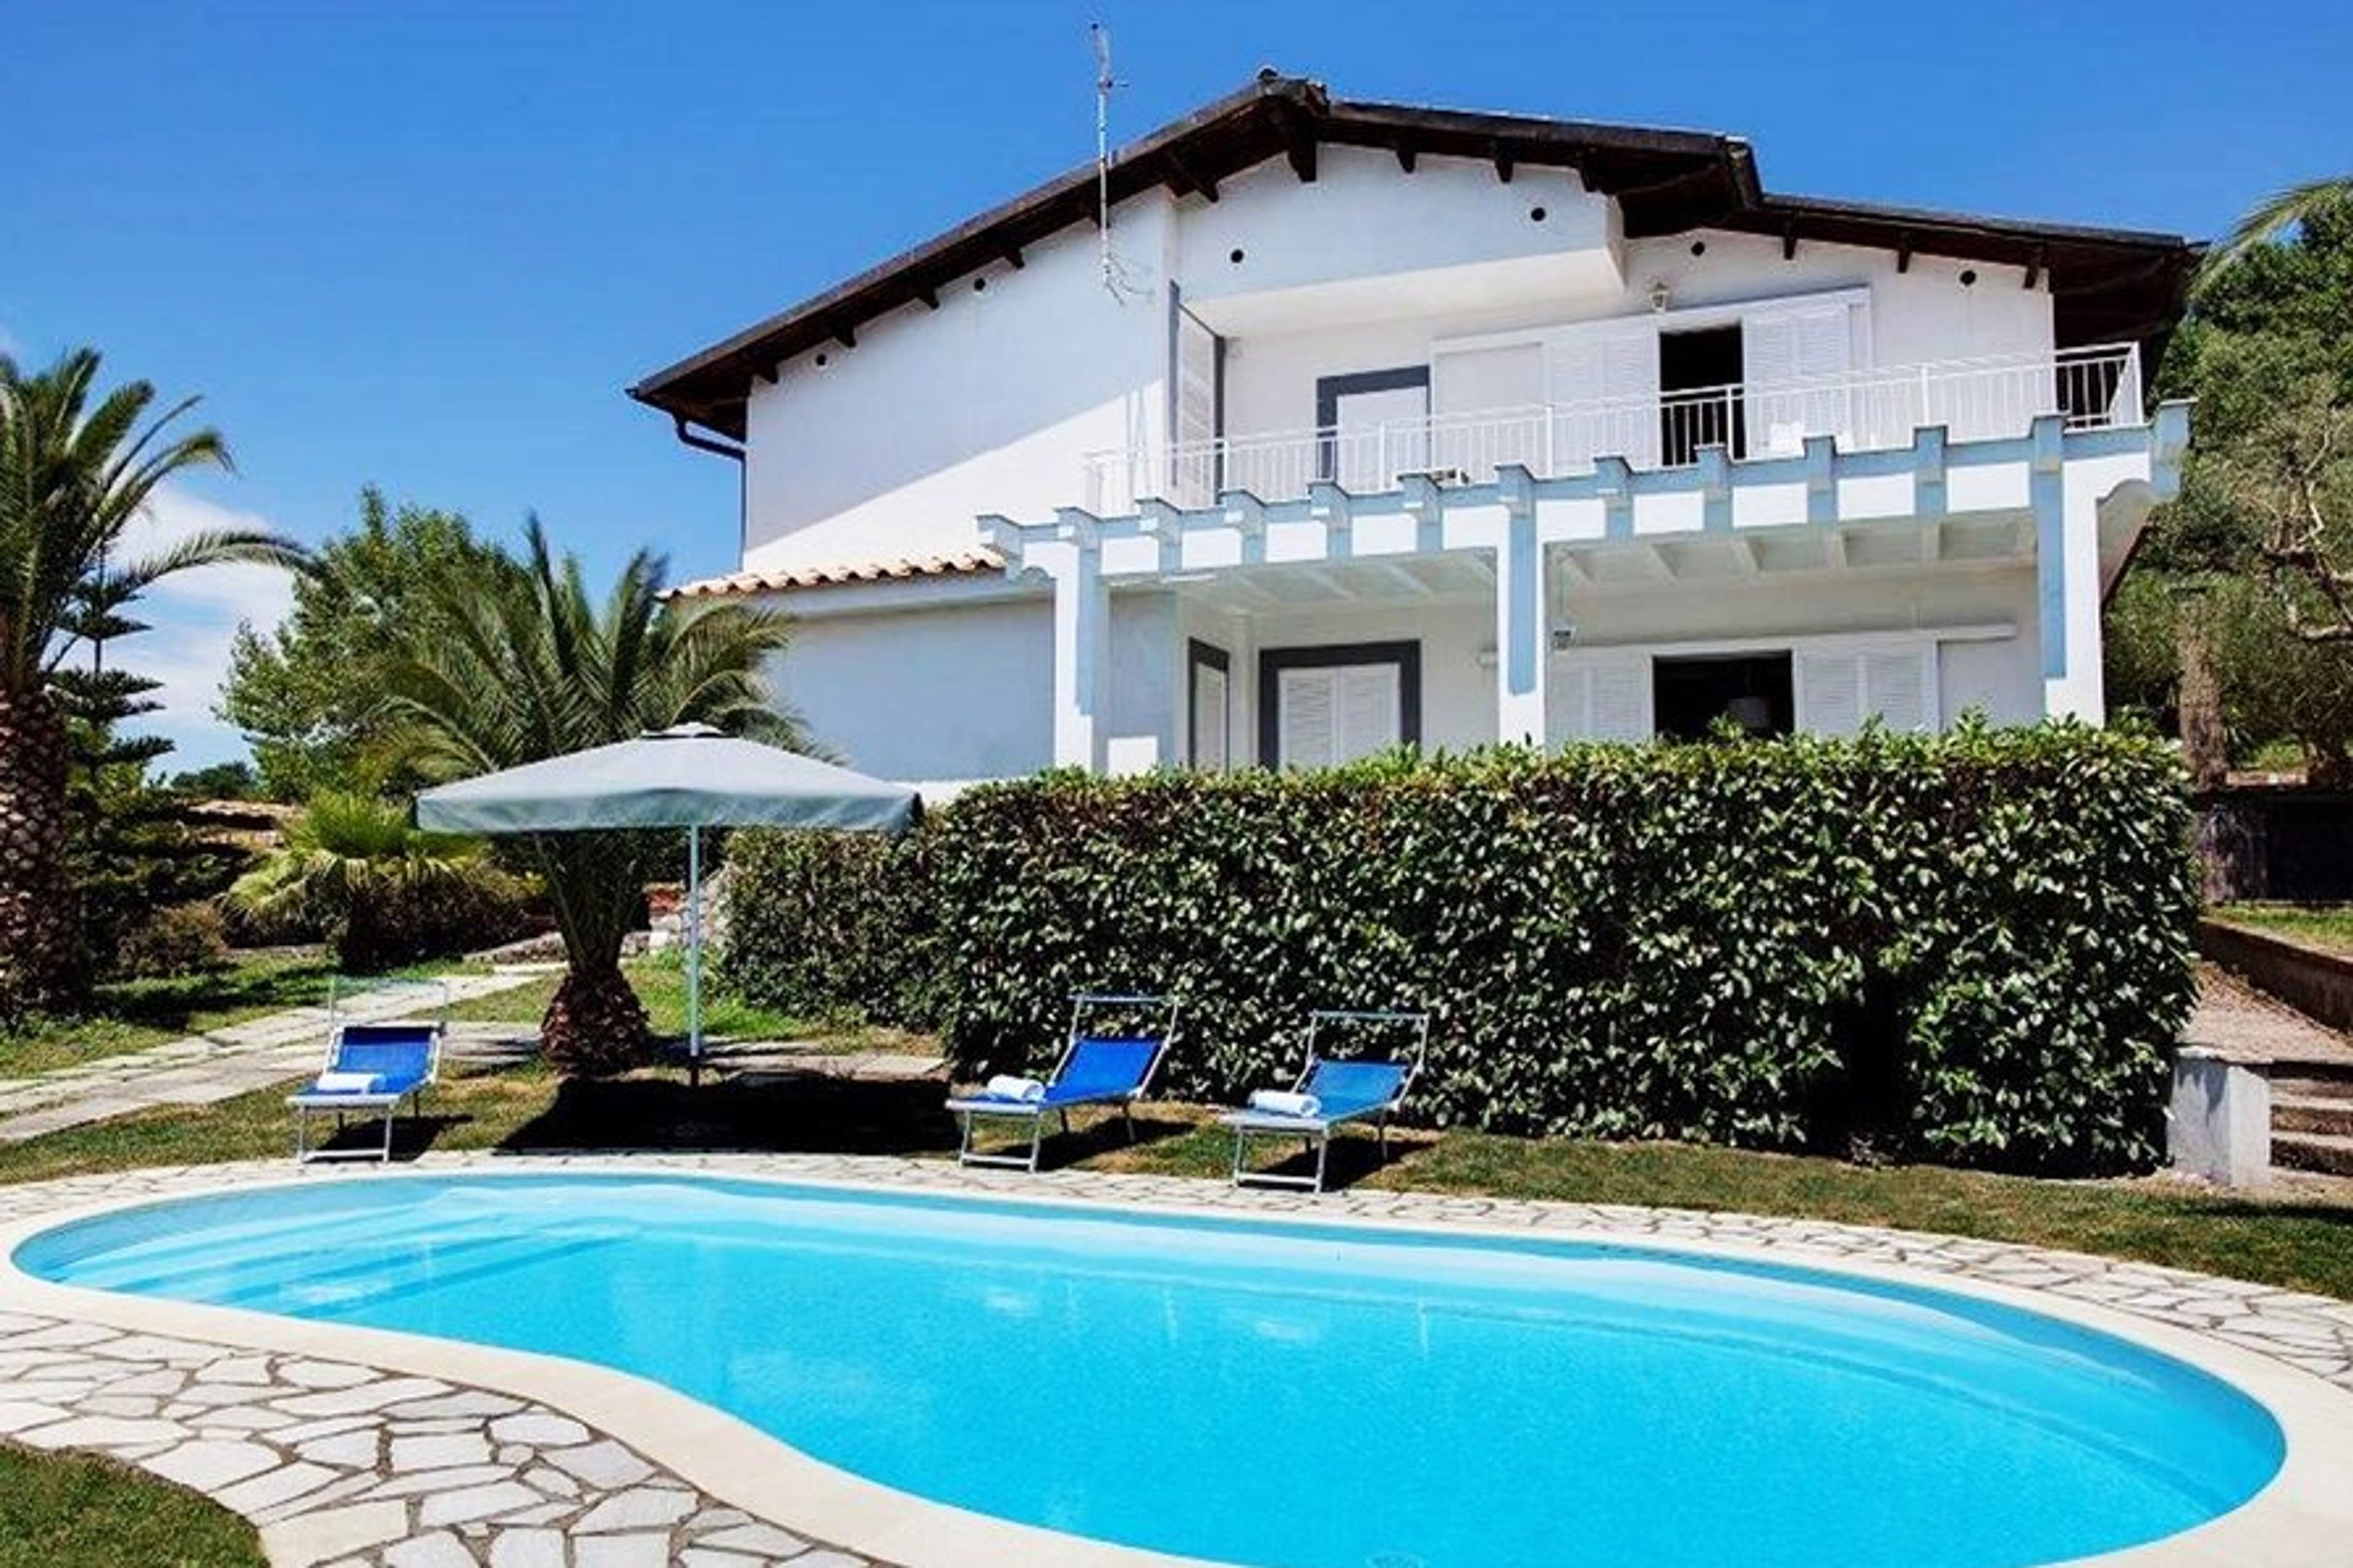 Villa Aldo nice external view and private swimming pool sorrentocoast